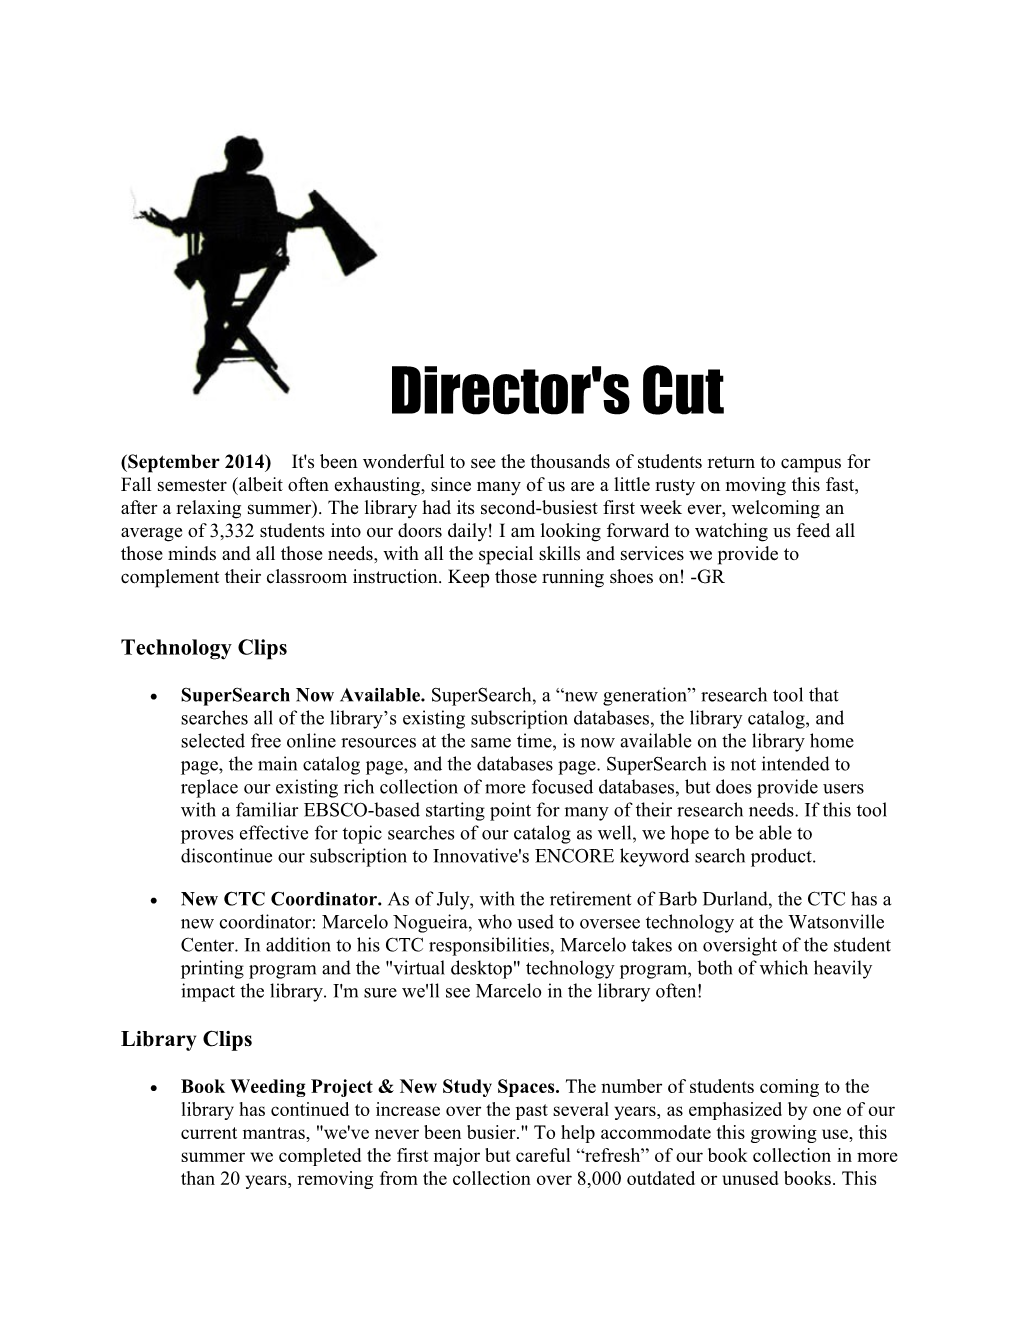 Director's Cut (September 2014) It's Been Wonderful to See the Thousands of Students Return